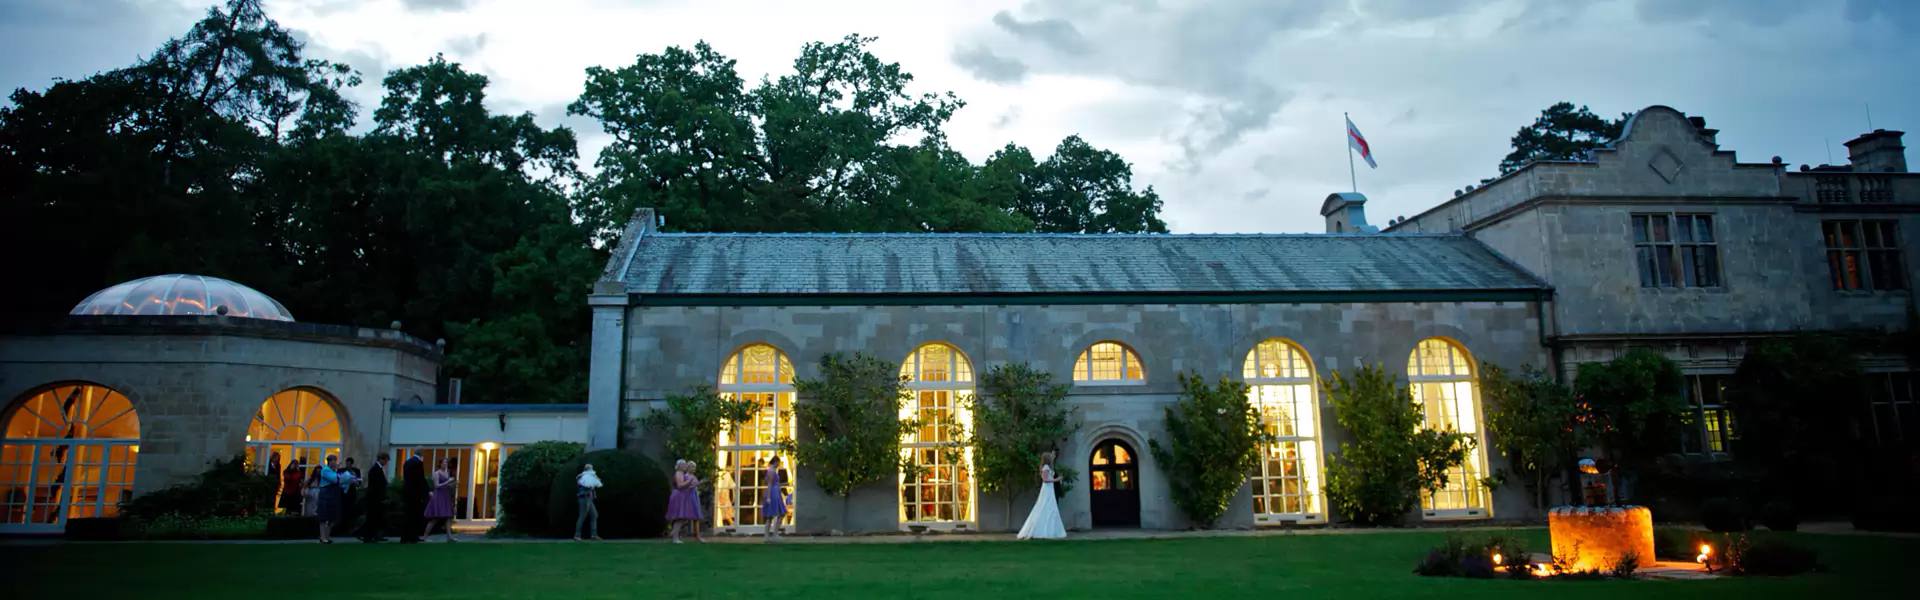 Suggestions for wedding venues - About Siobhàn Craven-Robins